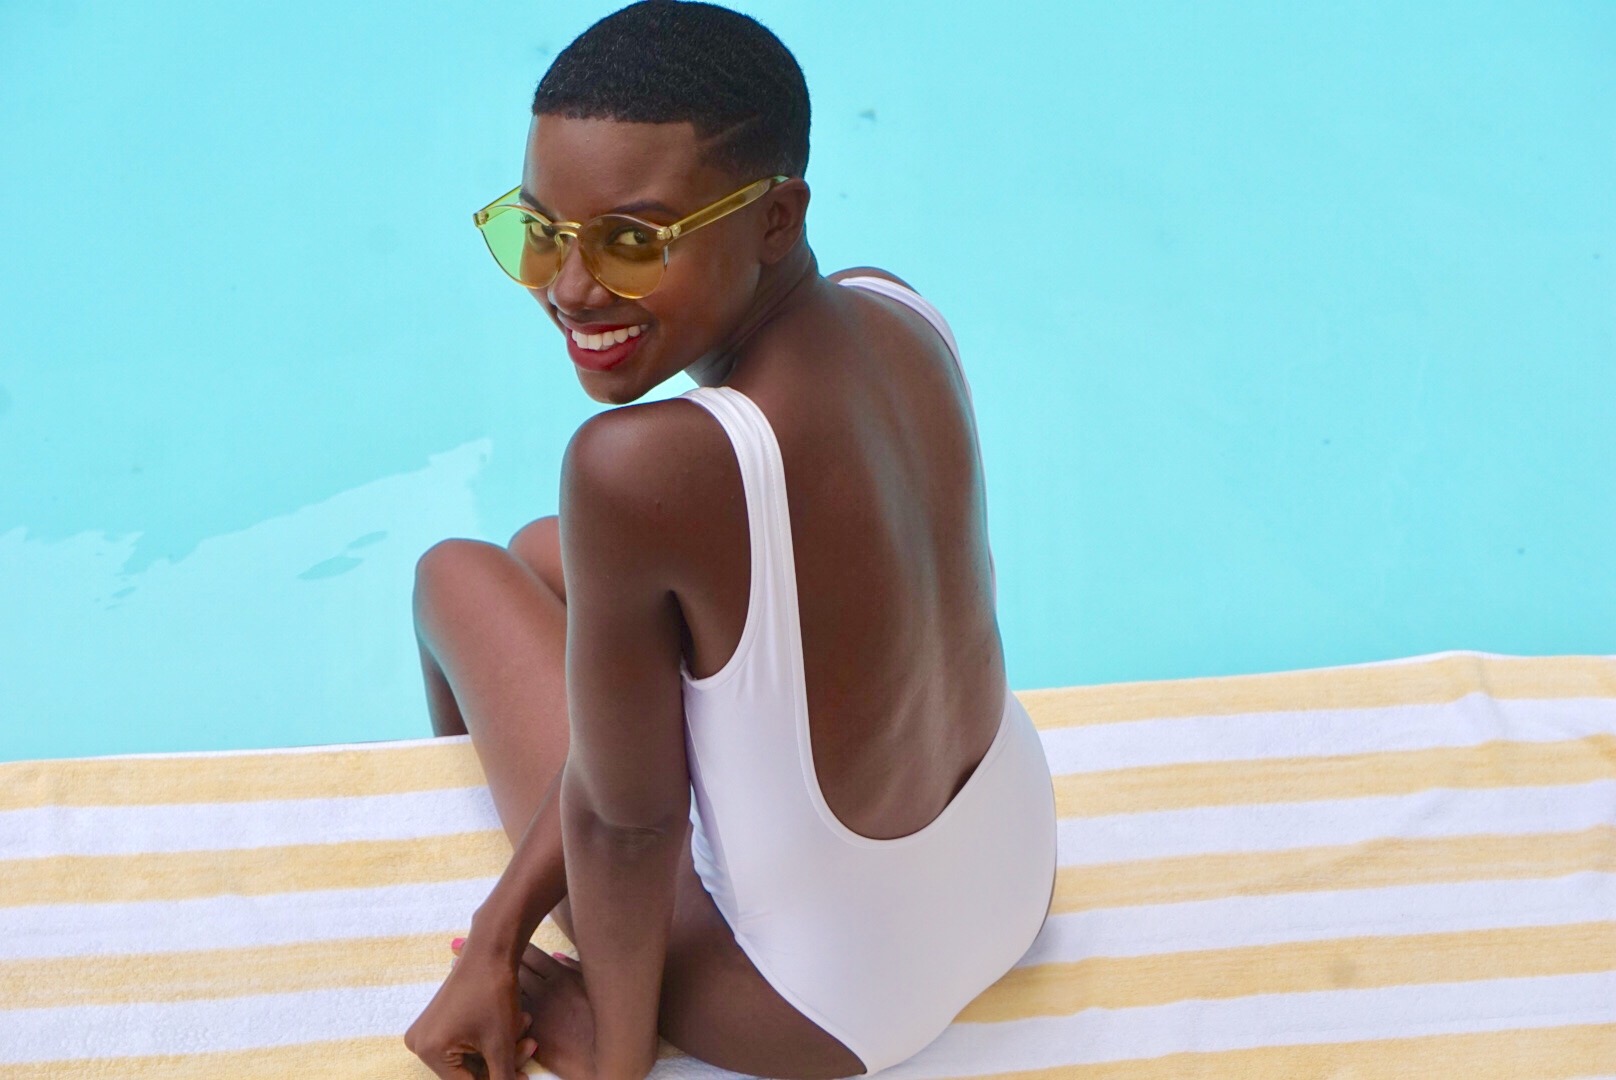 big chop, short natural hair, white one piece swimsuit, acrylic sunglasses